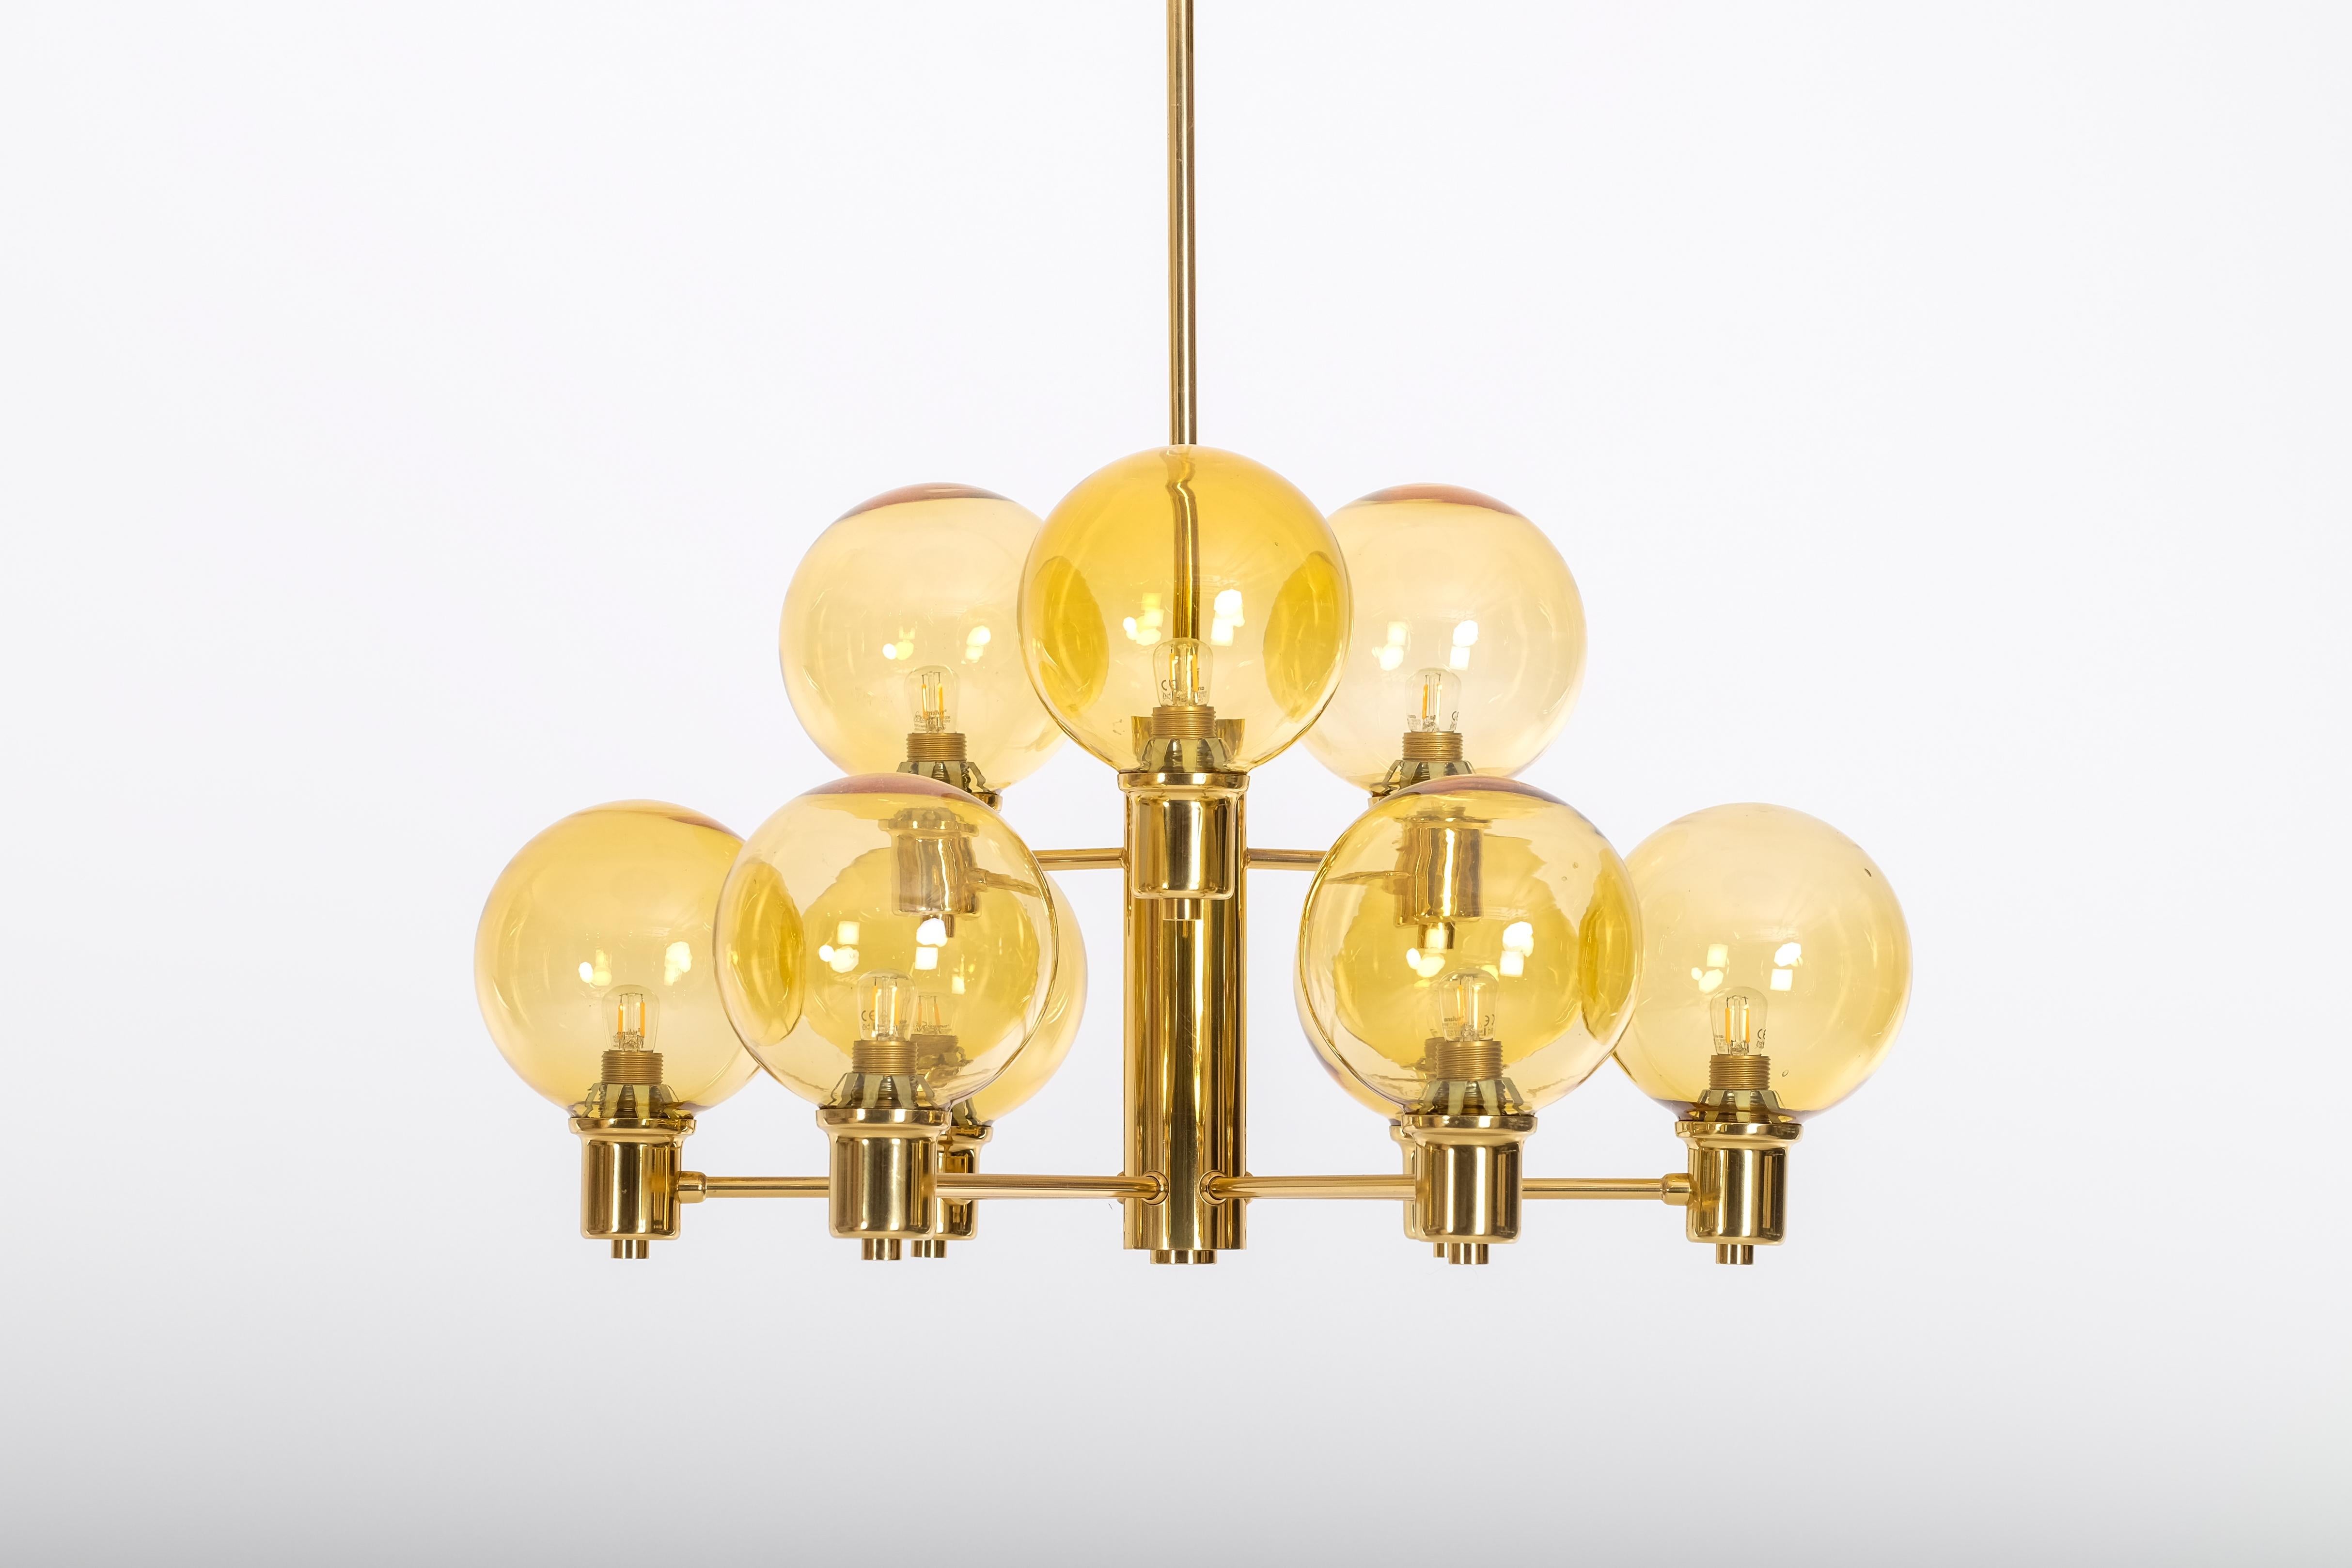 Set of 4 brass & glass chandeliers, Sweden, 1960s For Sale 2